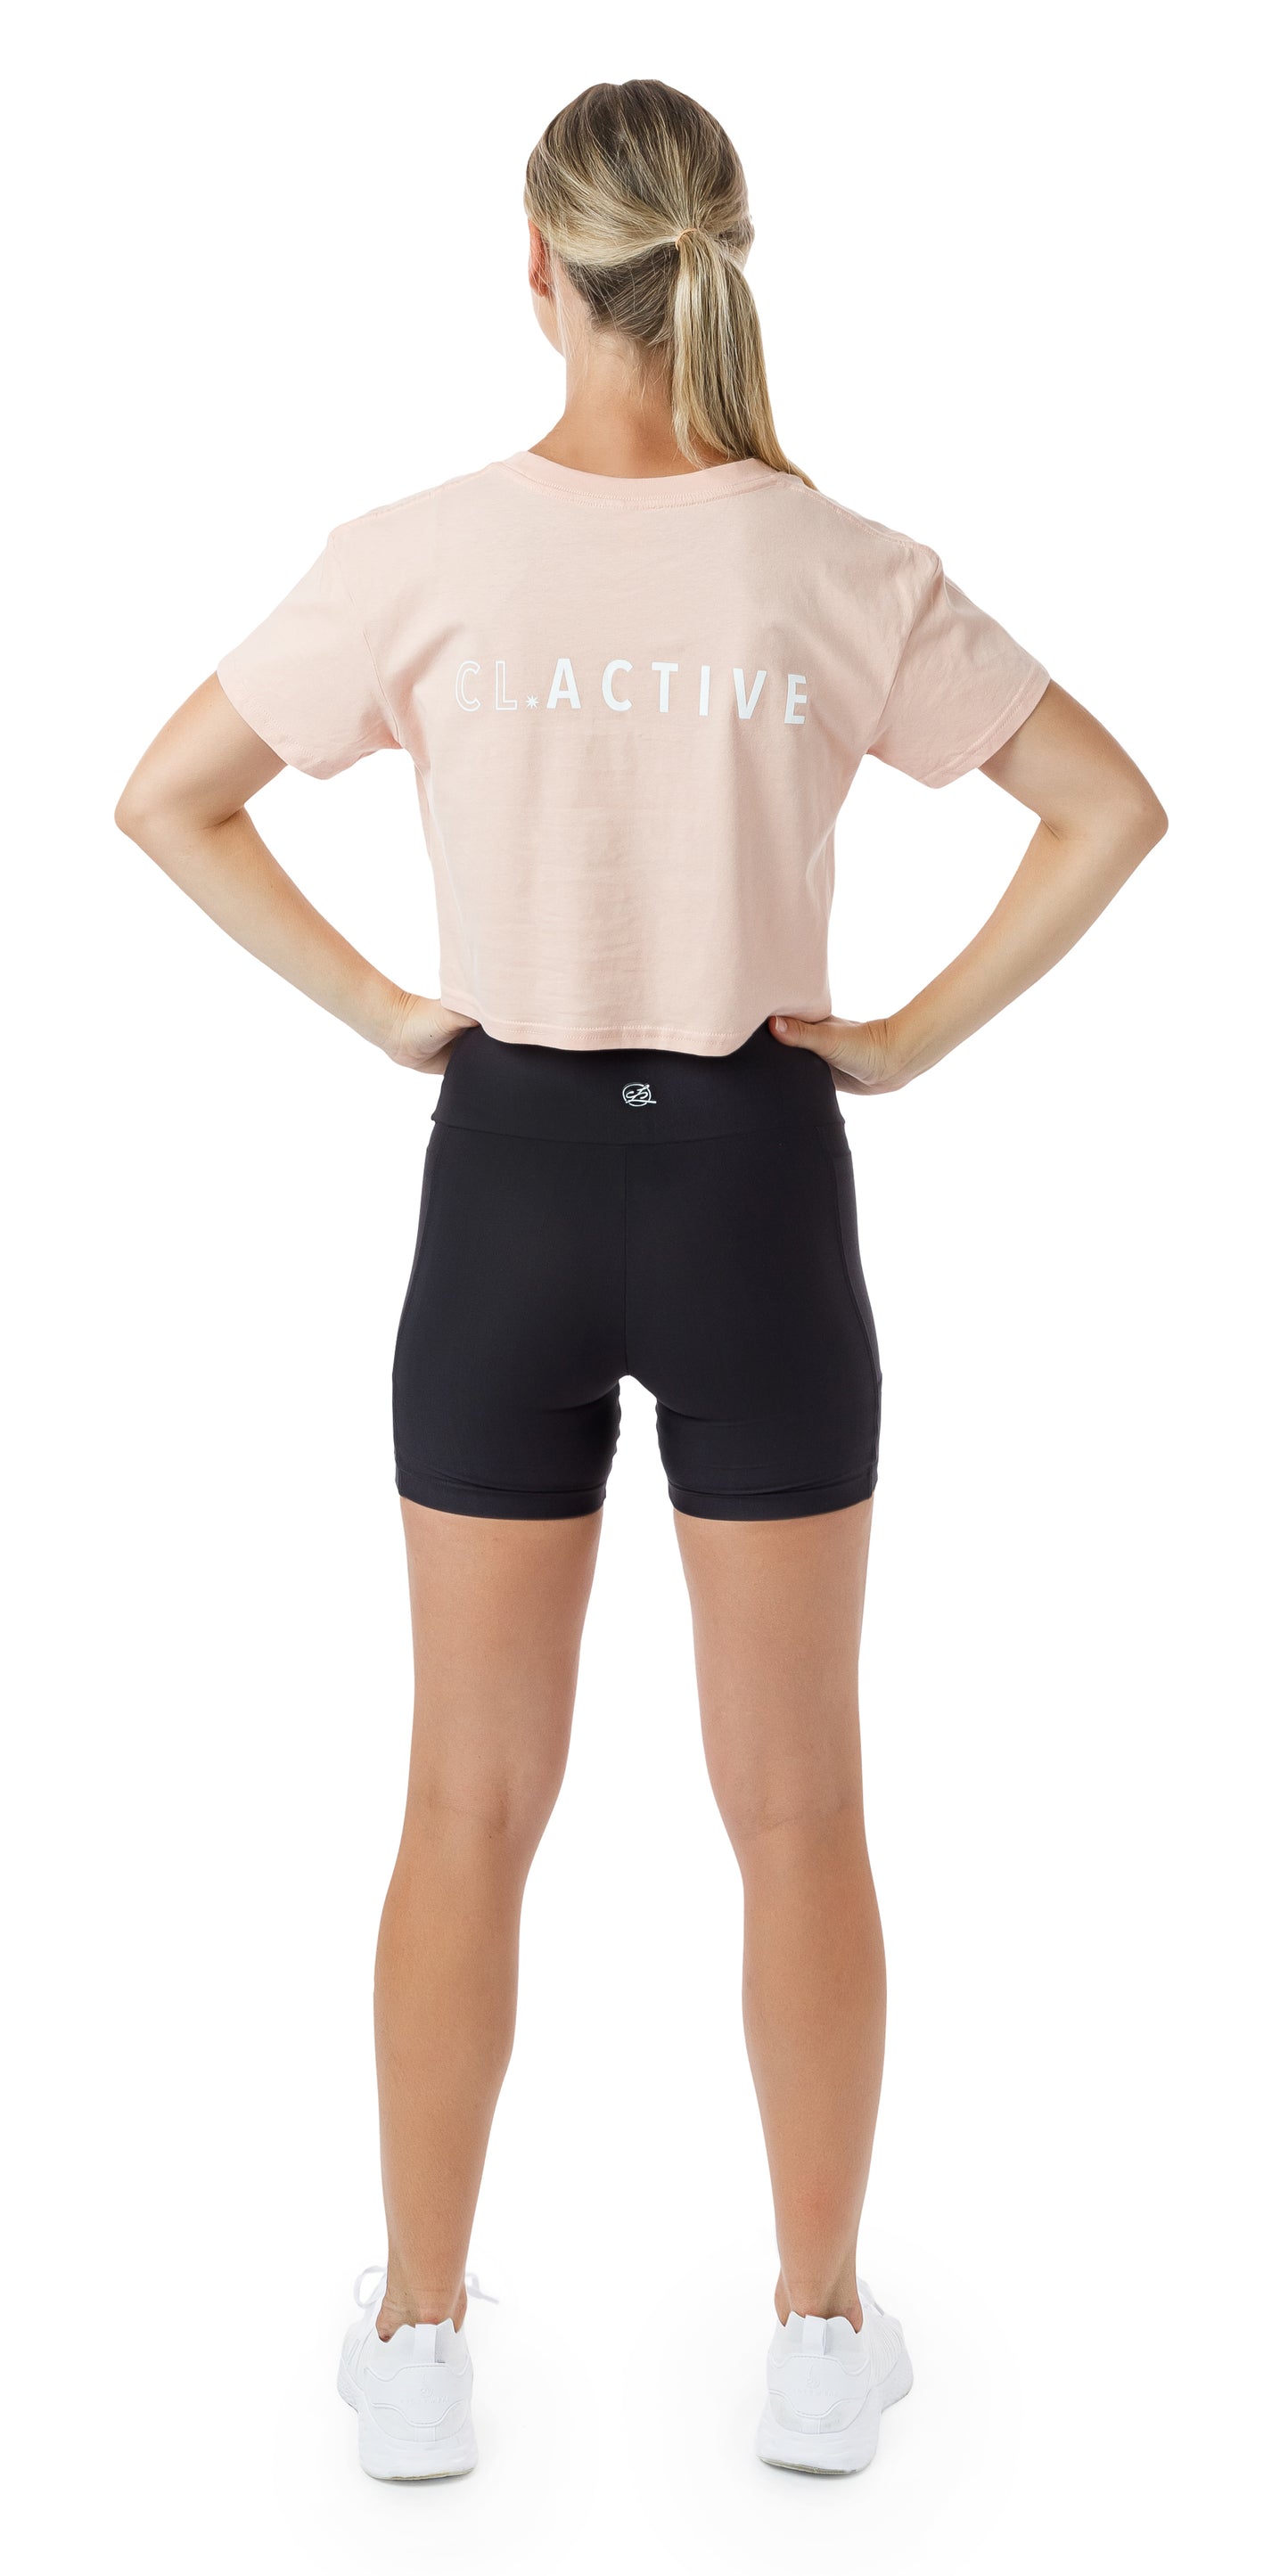 Full body rear view of girl in Pink CL Active Crop Tee and black biker shorts putting both hands on waist